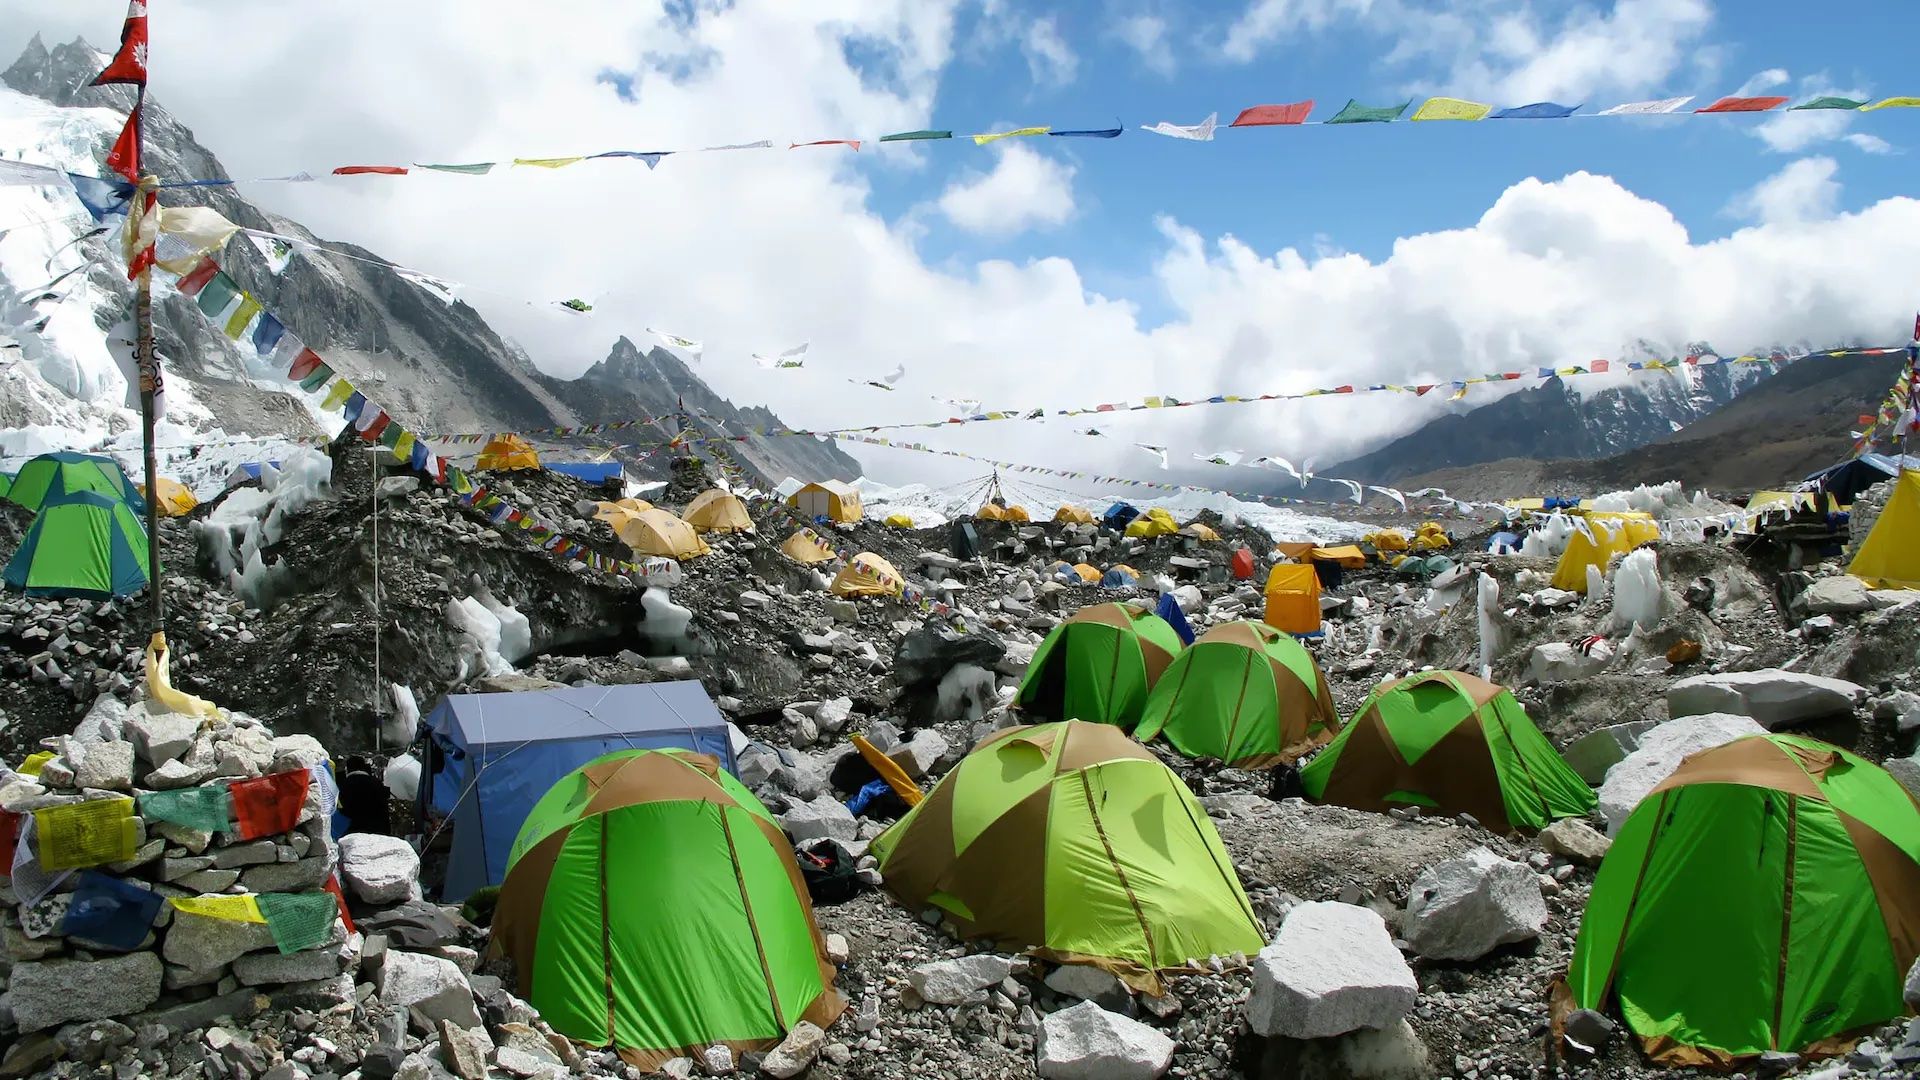 One of the camp sites en route to Everest Base Camp in the Himalayas, Nepal.